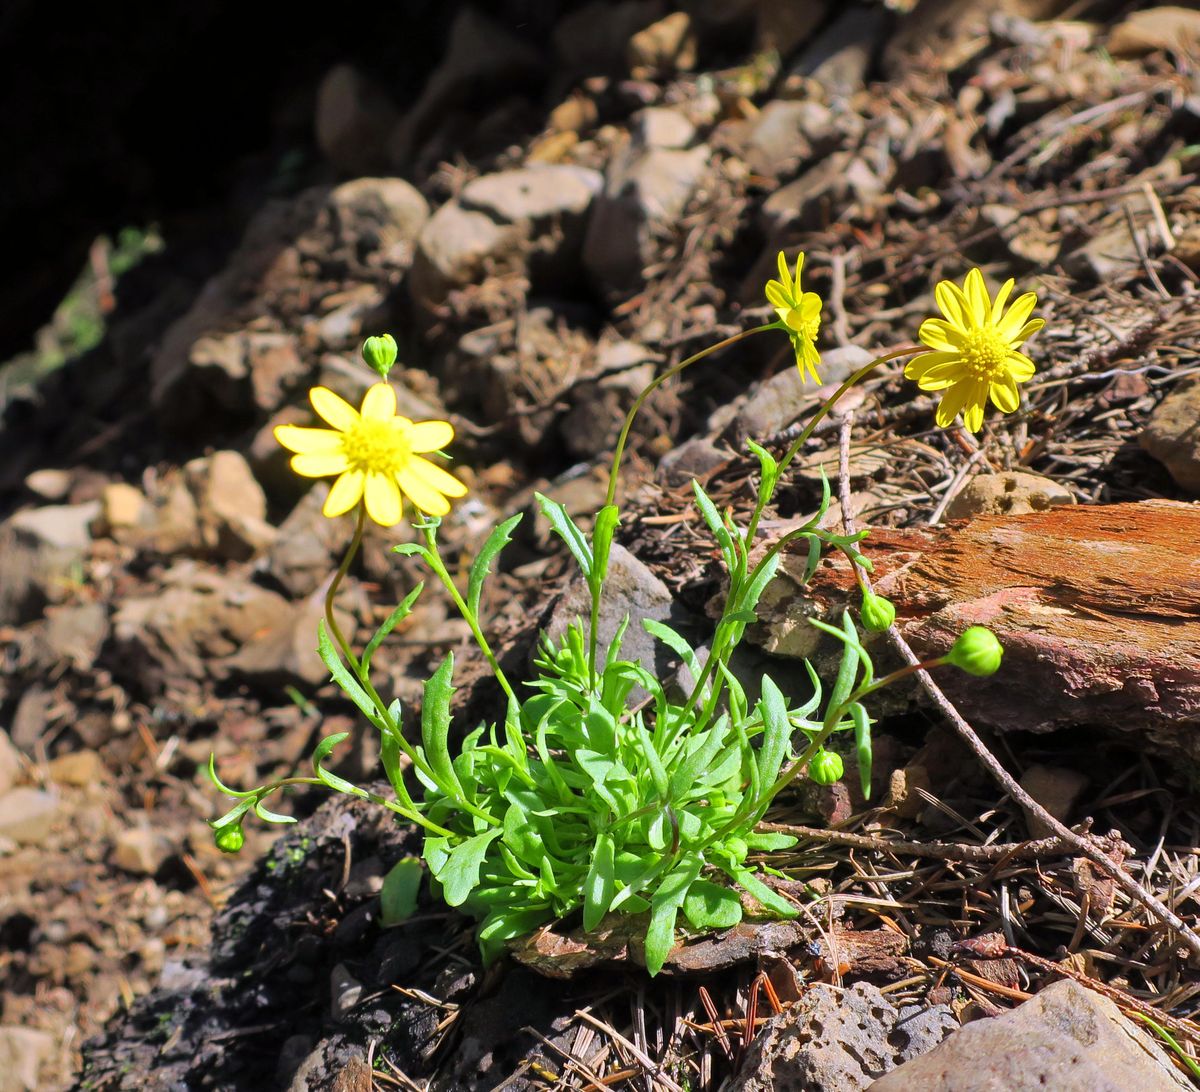 A wildflower grows alongside the trail in the burn zone in Oneonta Gorge near the Historic Columbia River Highway. (John  Nelson / The Spokesman-Review)